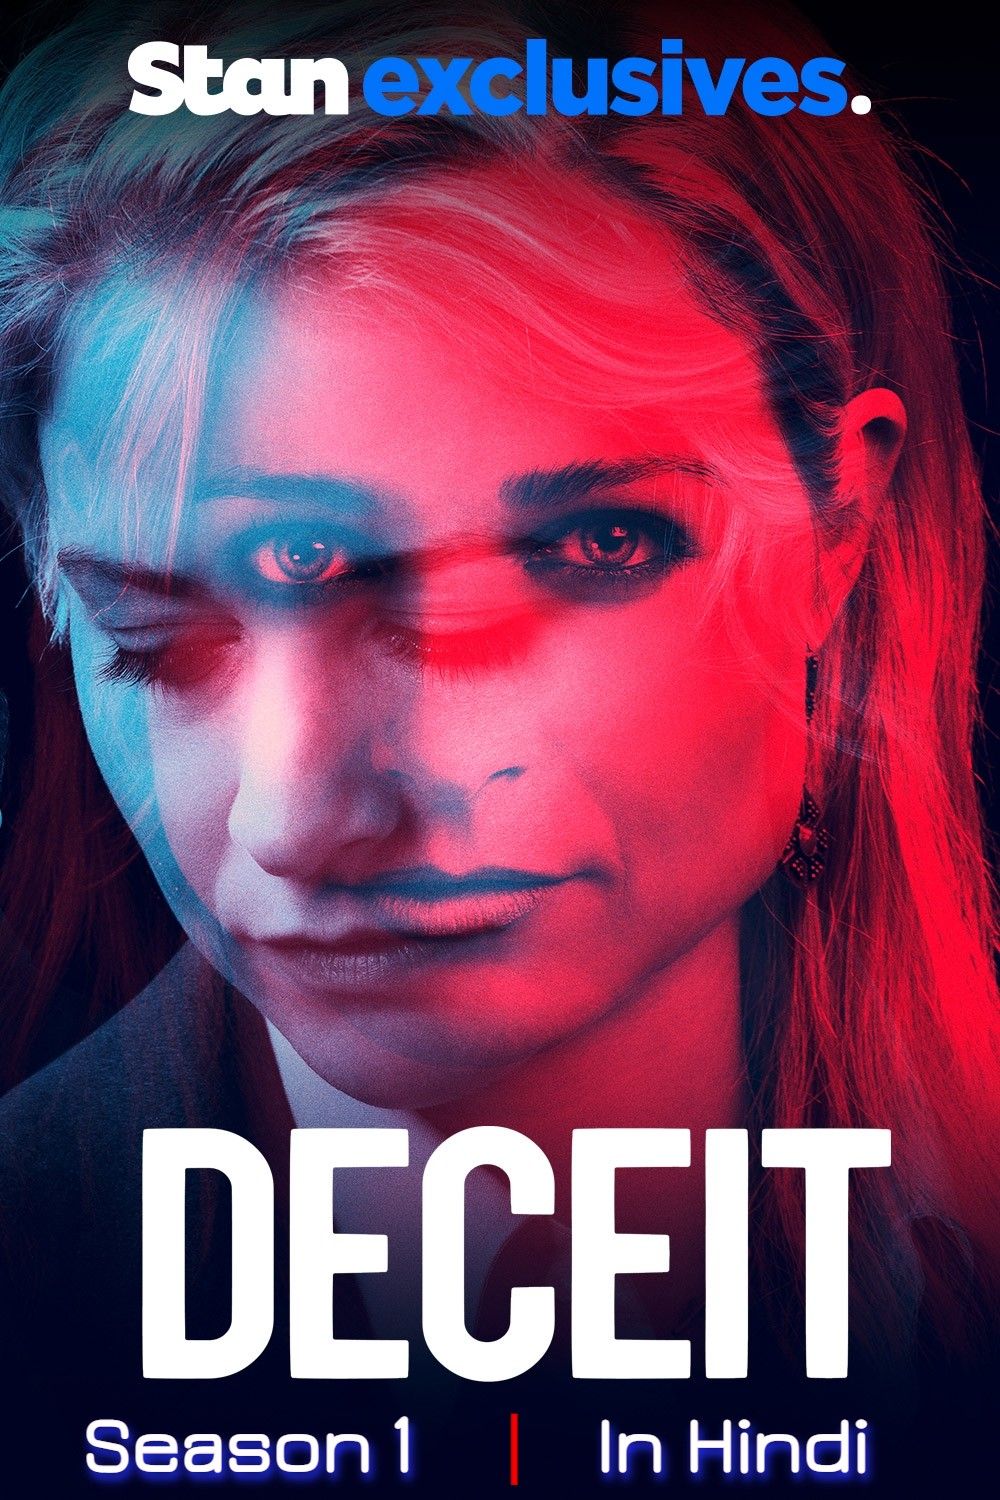 Deceit (Season 1) 2021 Hindi Dubbed Complete Series download full movie